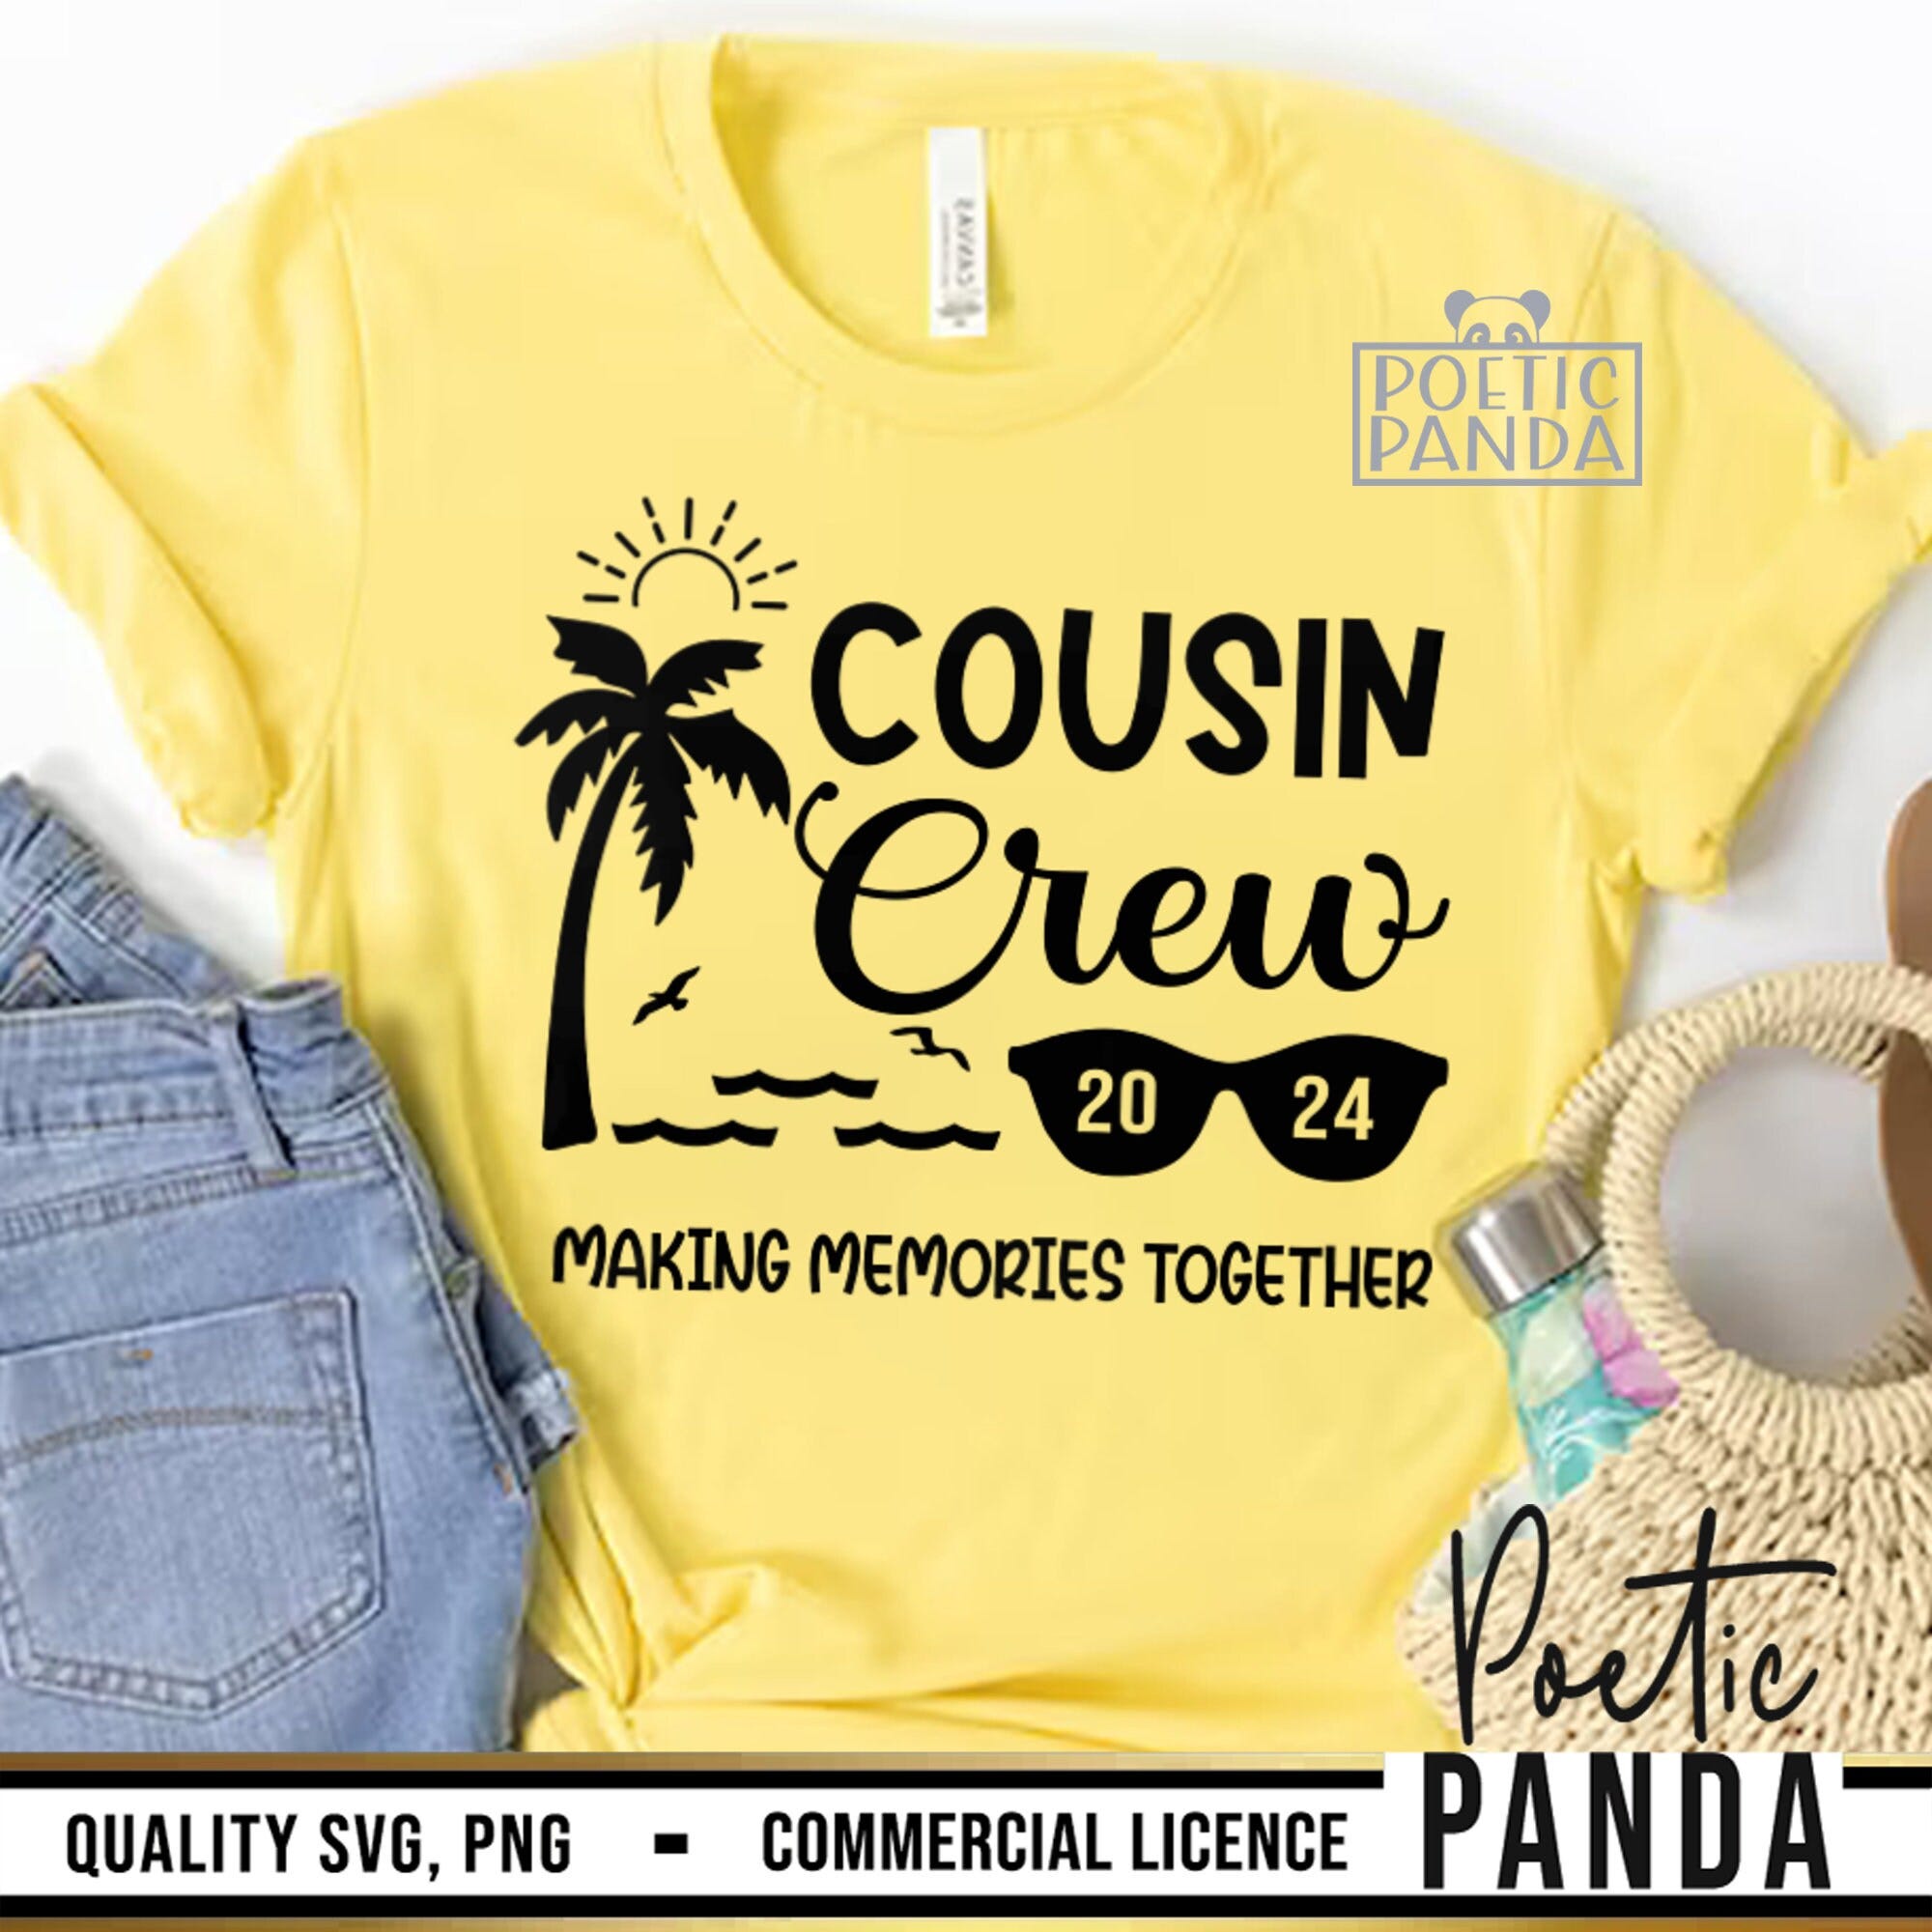 2024 Cousin Crew SVG PNG, Cousin Vacation Svg, Cousin Shirt Svg, Cousin Crew Beach 2024 Svg, Family Trip Svg, Making Memories Svg